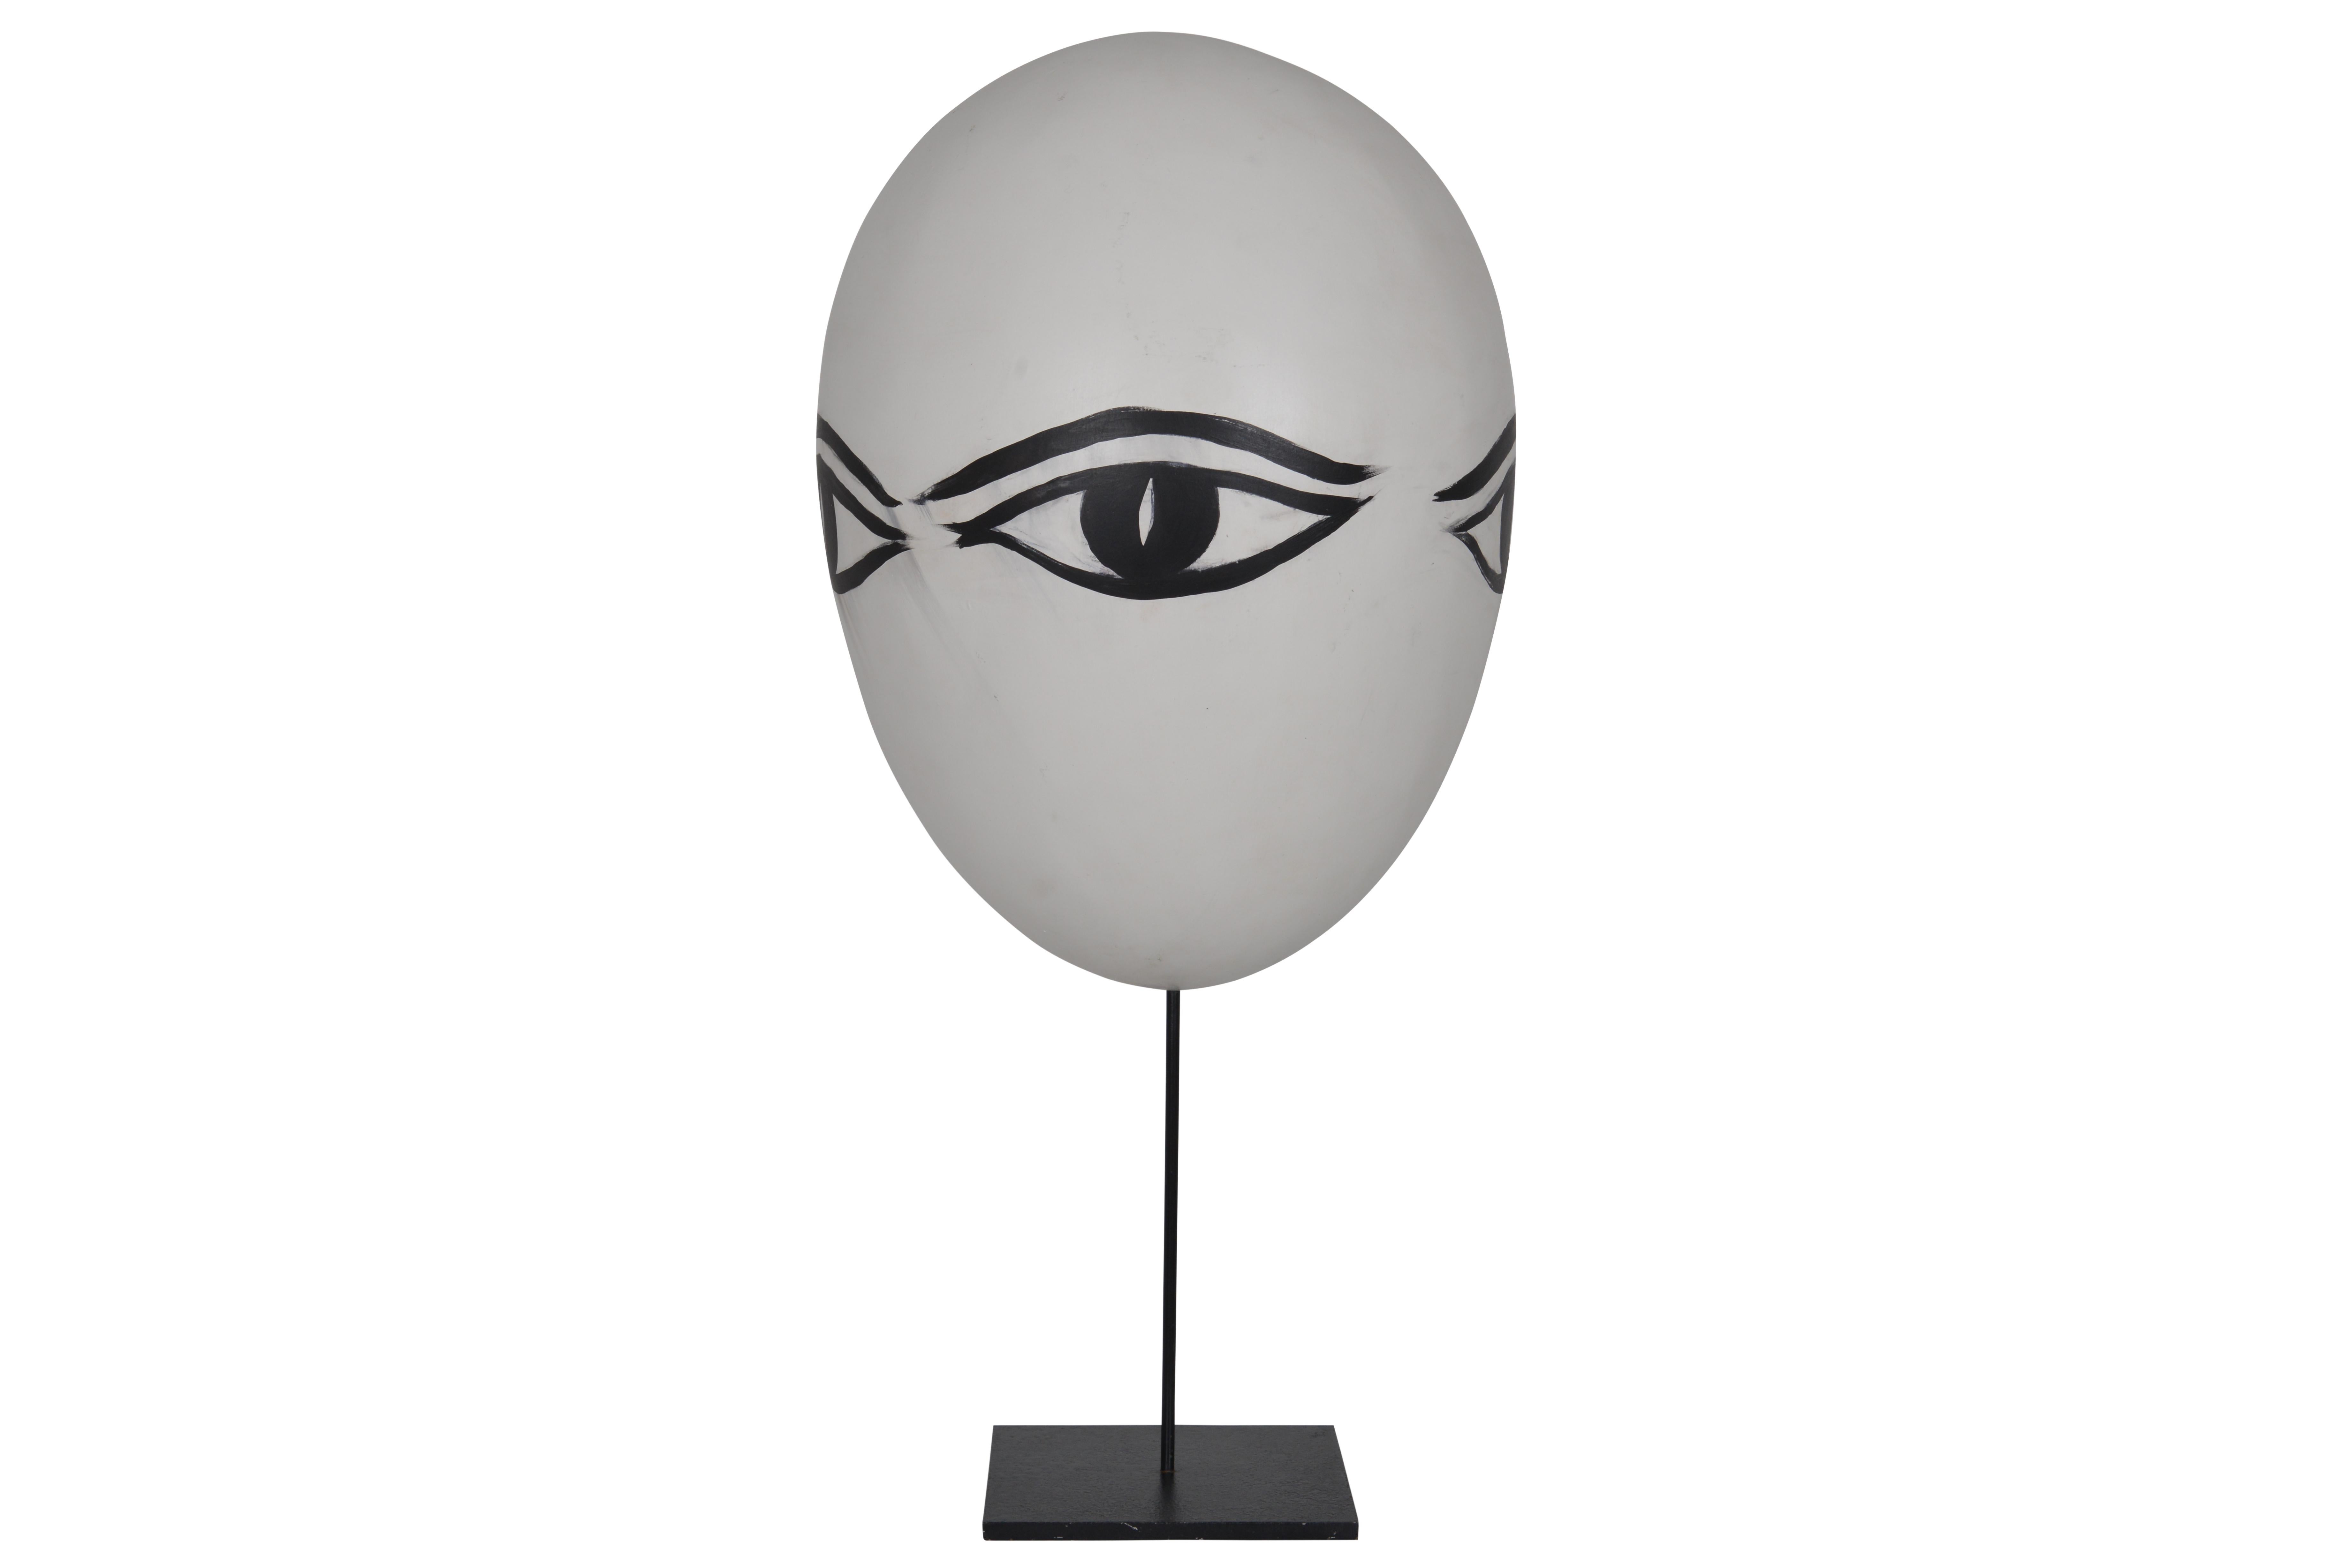 Quirky oversized egg-shaped object with 3 big painted black eyelined eyes. Signed Lorieux.